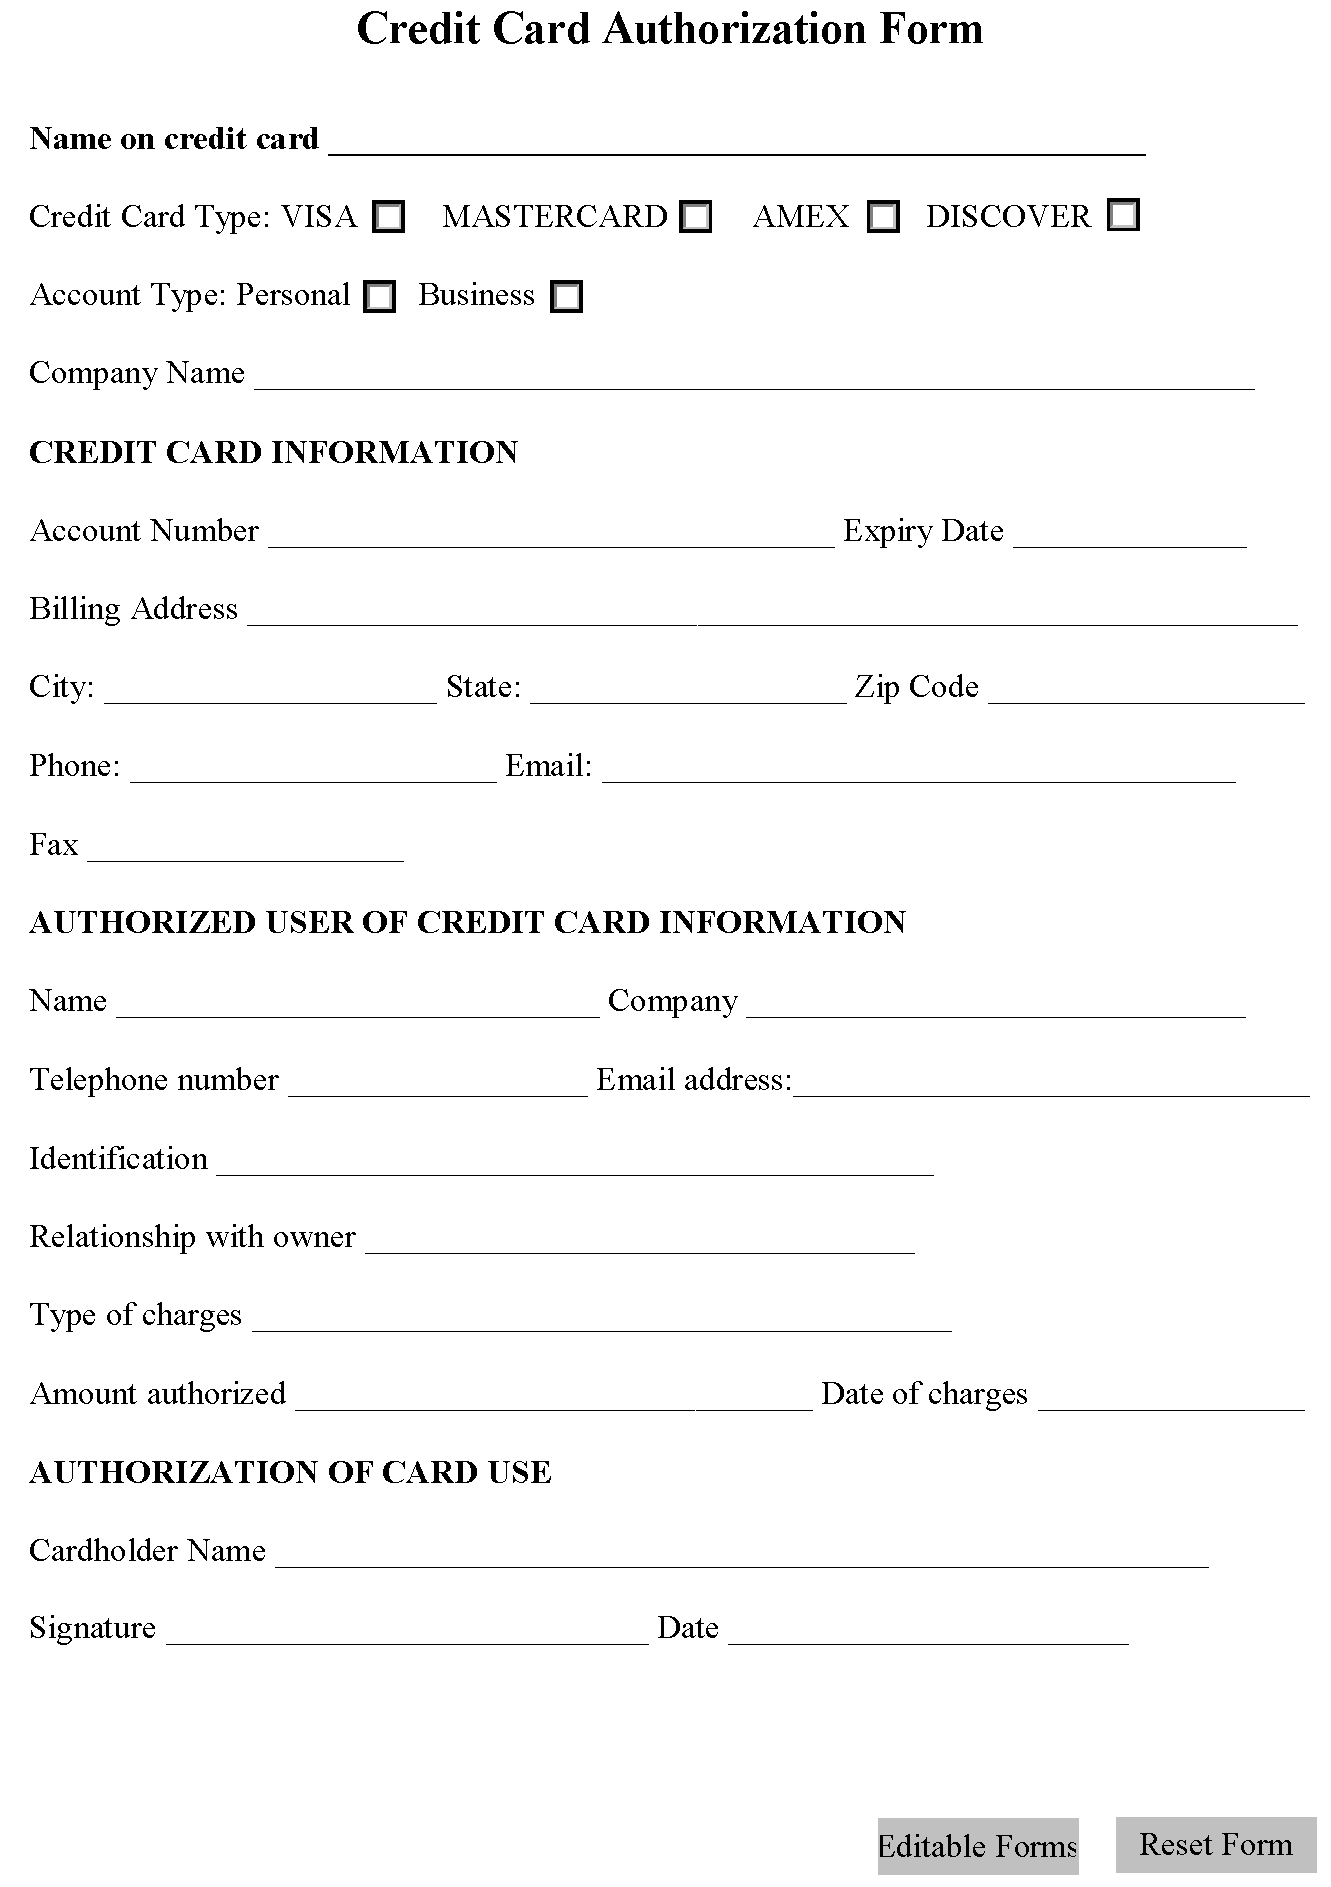 Credit Card Authorization Form | Editable Forms Intended For Credit Card Authorization Form Template Word